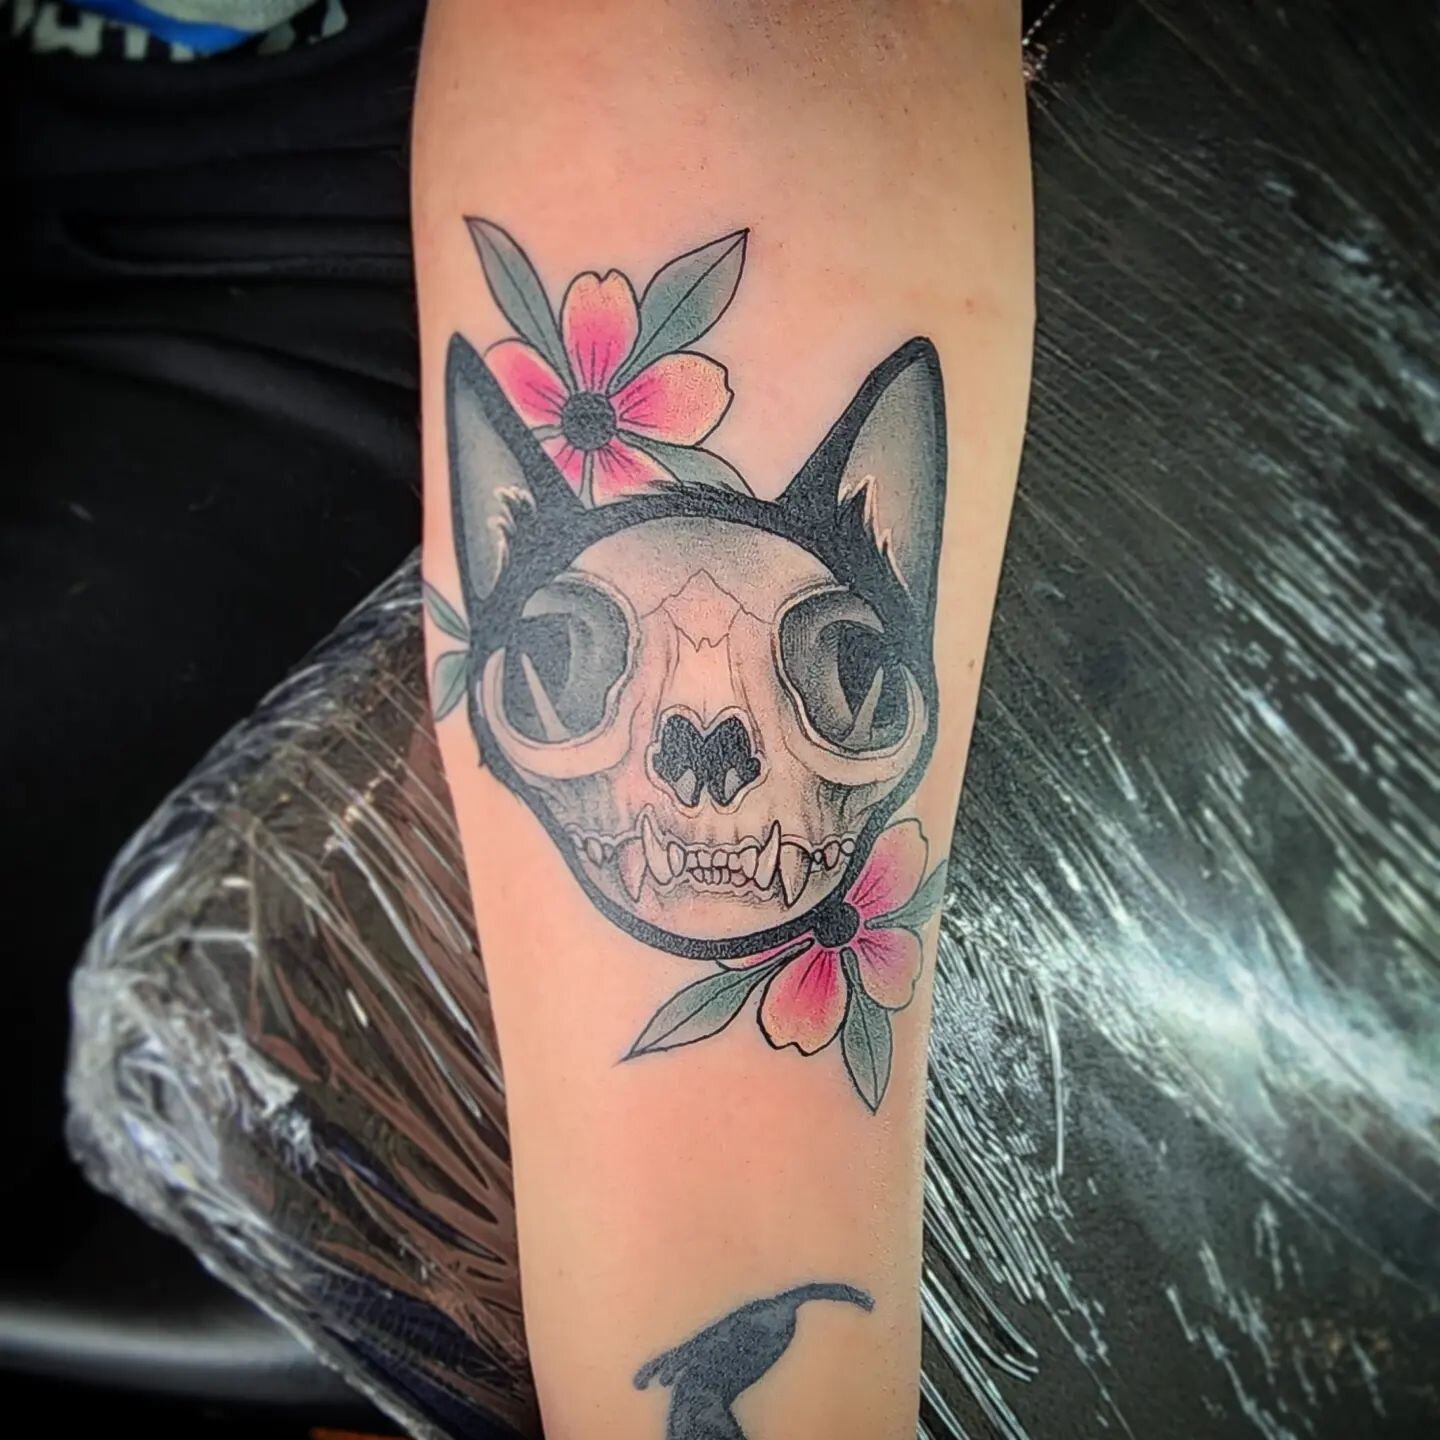 Thank you Allison! This was fun #cattoo #cattattoo #catskull